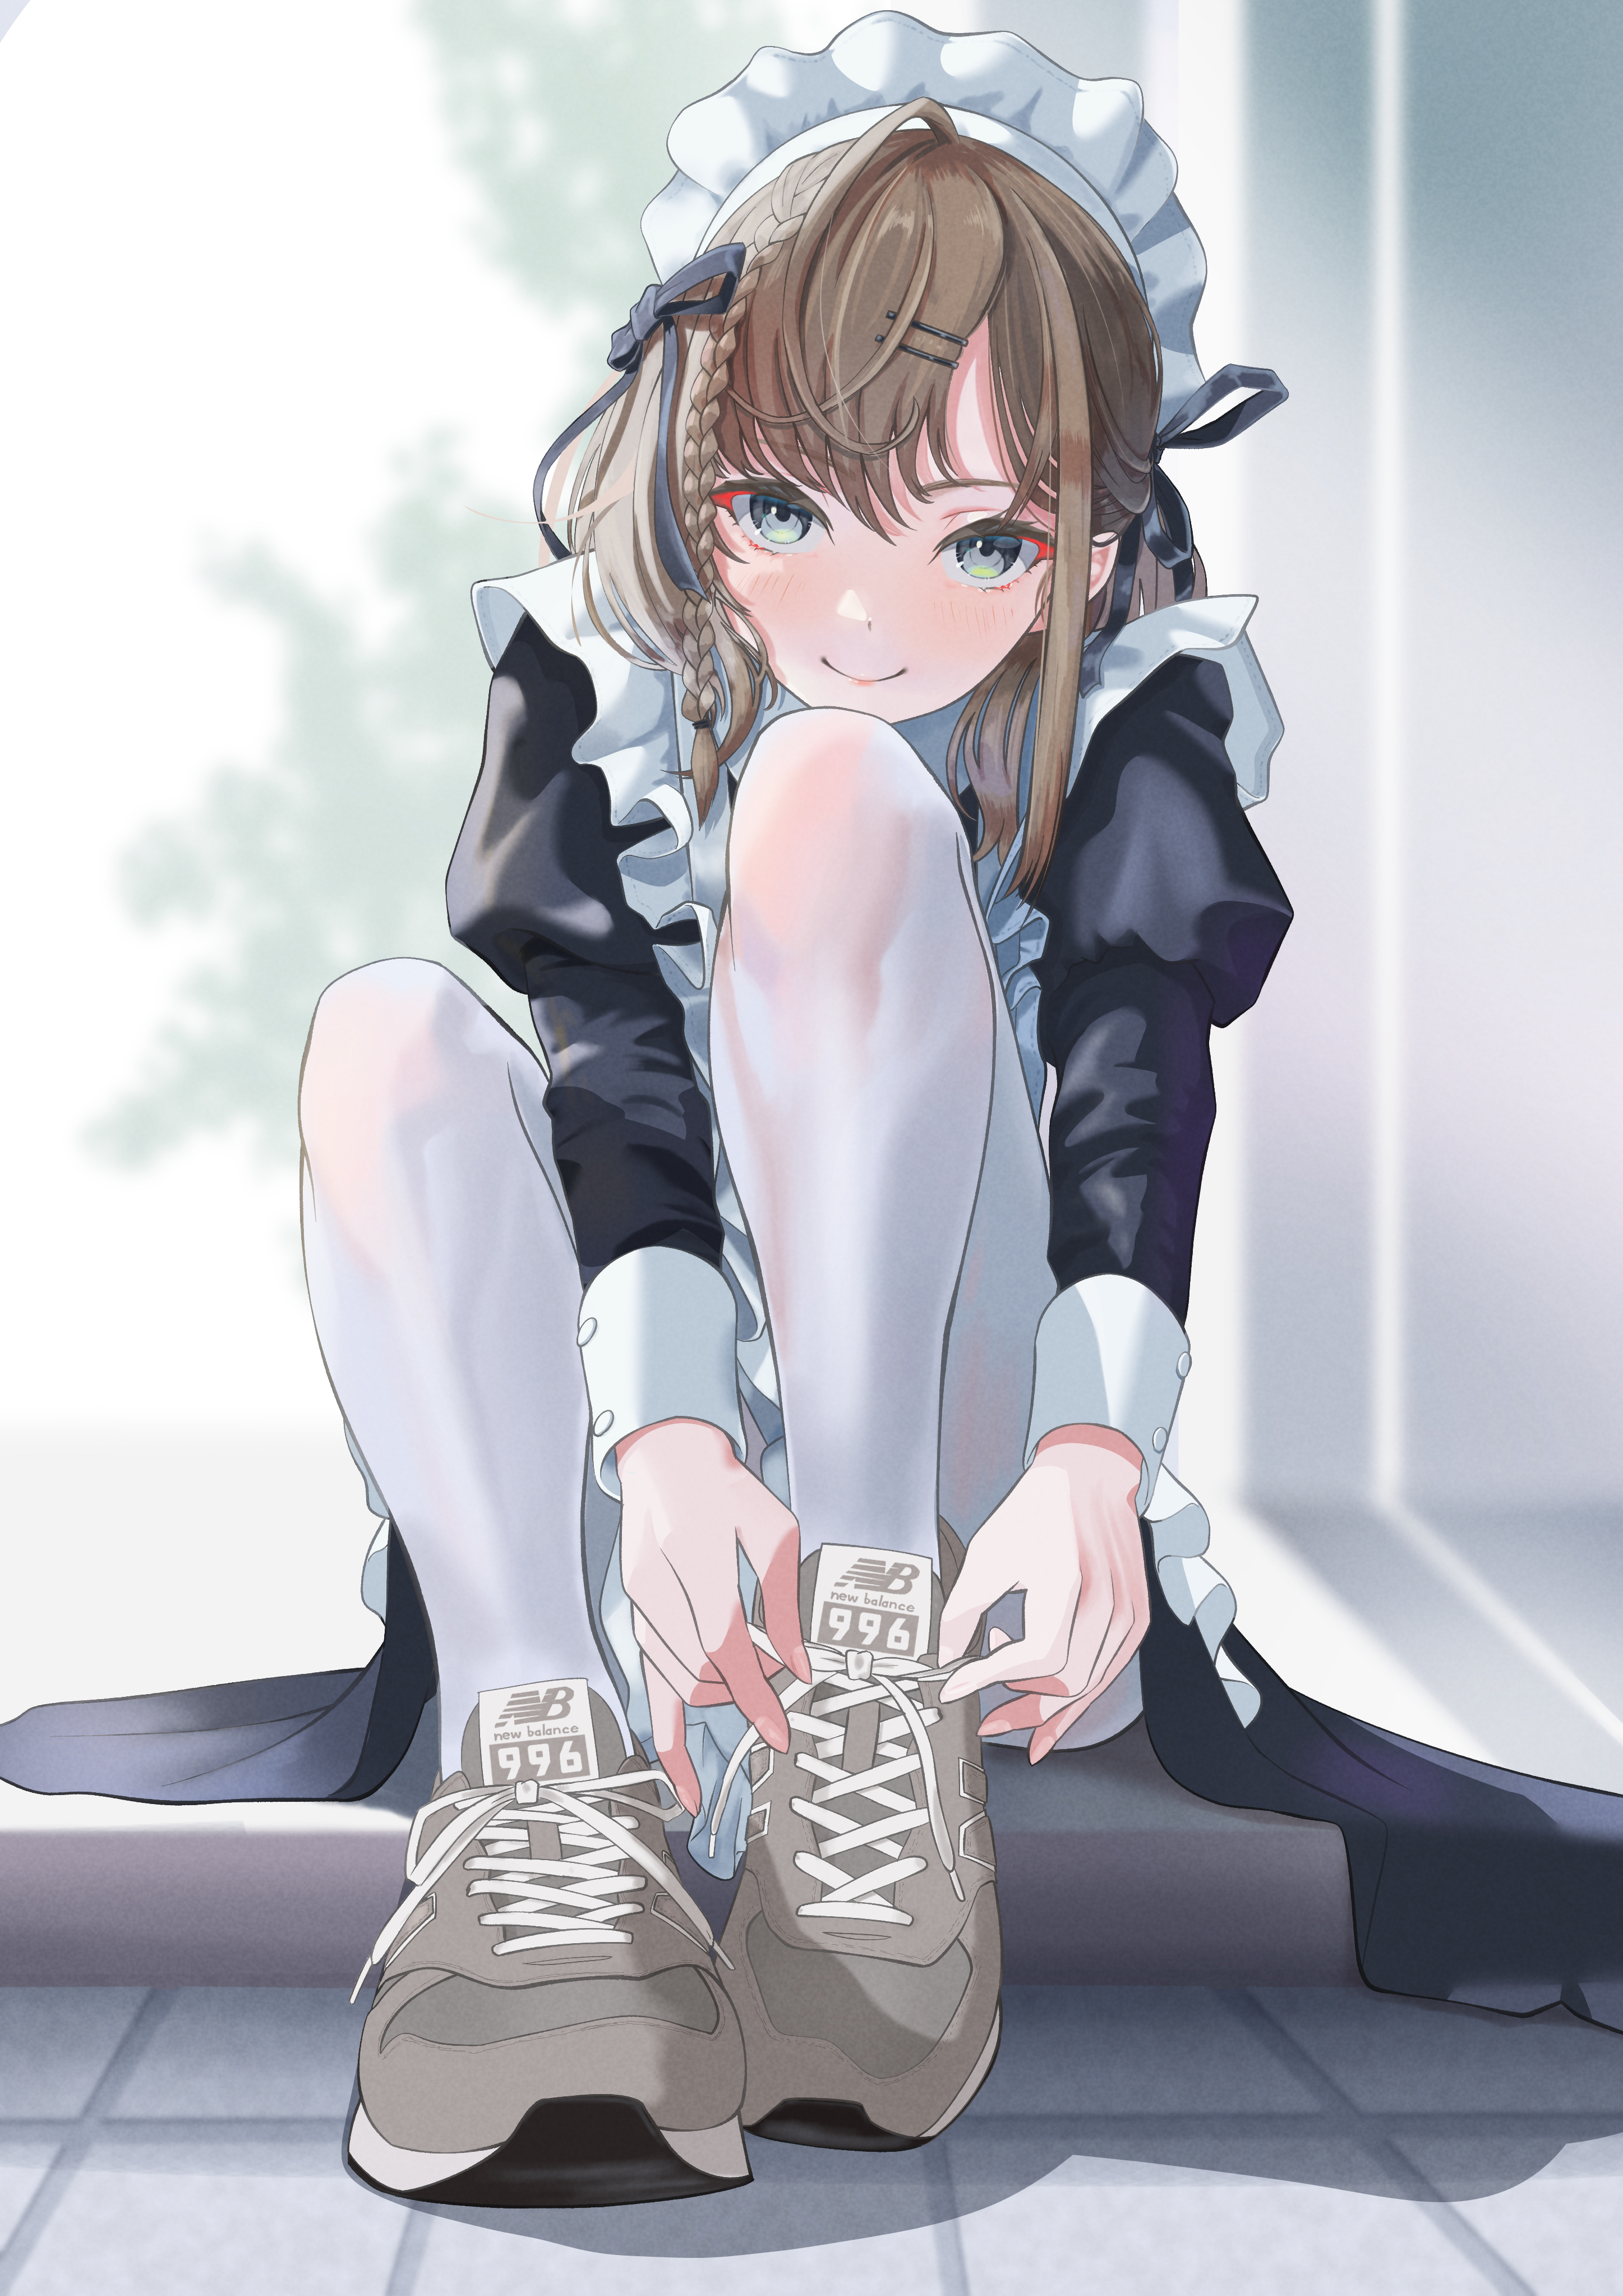 White Socks Maid Maid Outfit Anime Girls Shoes Braids Green Eyes 2894x4093